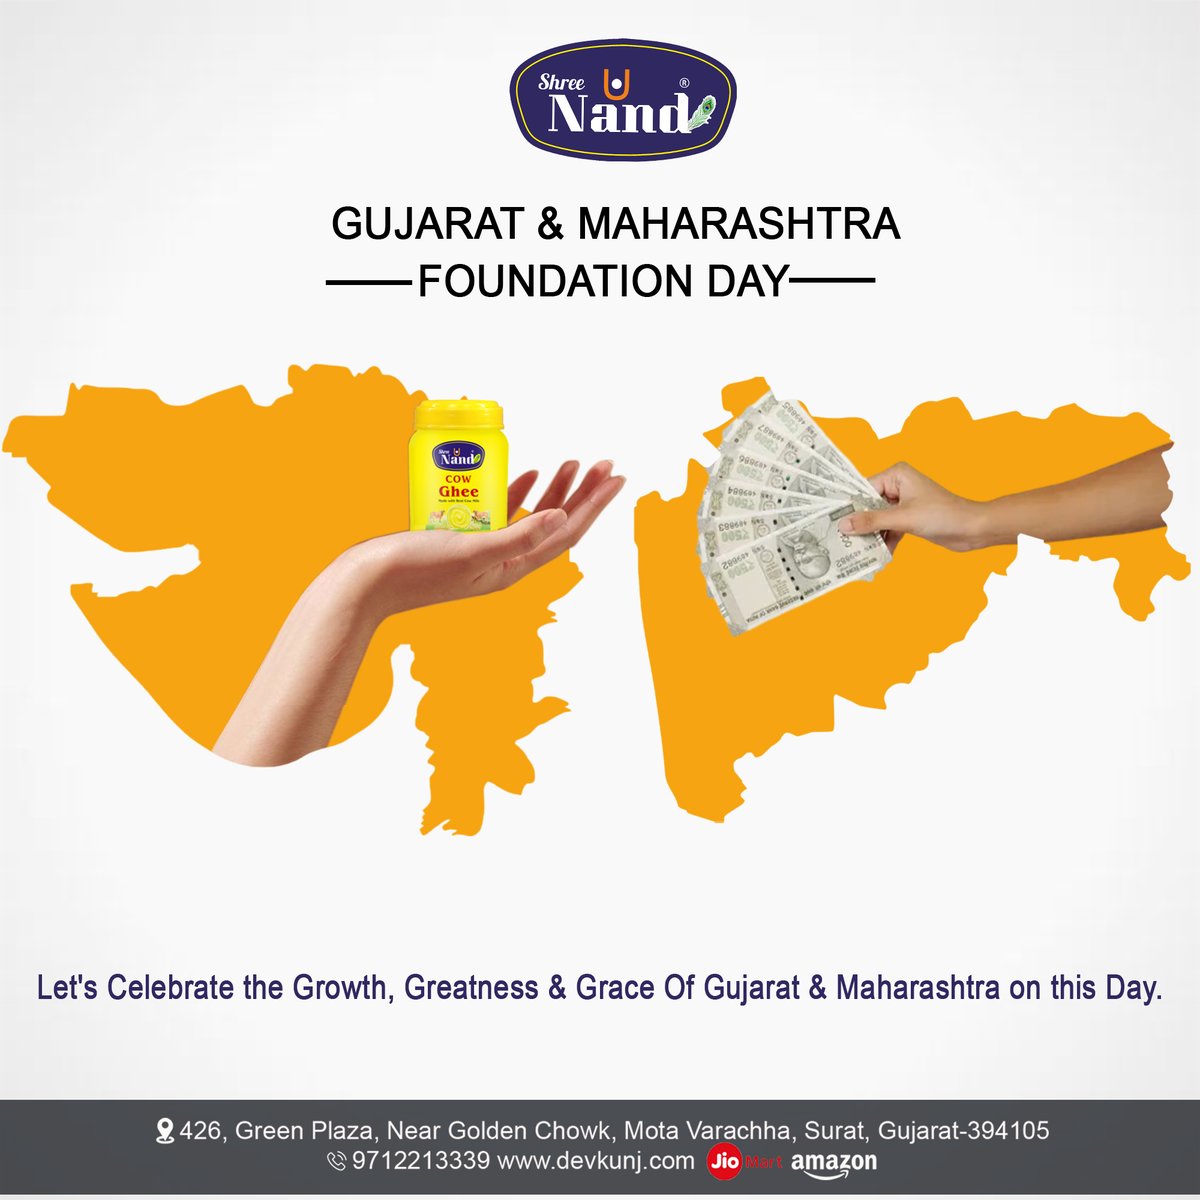 Happy Establishment Day to Gujarat and Maharashtra! 🎉 Celebrating with the richness of Shree Nand Ghee, symbolizing tradition, purity, and prosperity. 🐄✨ #GujaratDay #MaharashtraDay #ShreeNandGhee #Tradition #Purity #Prosperity